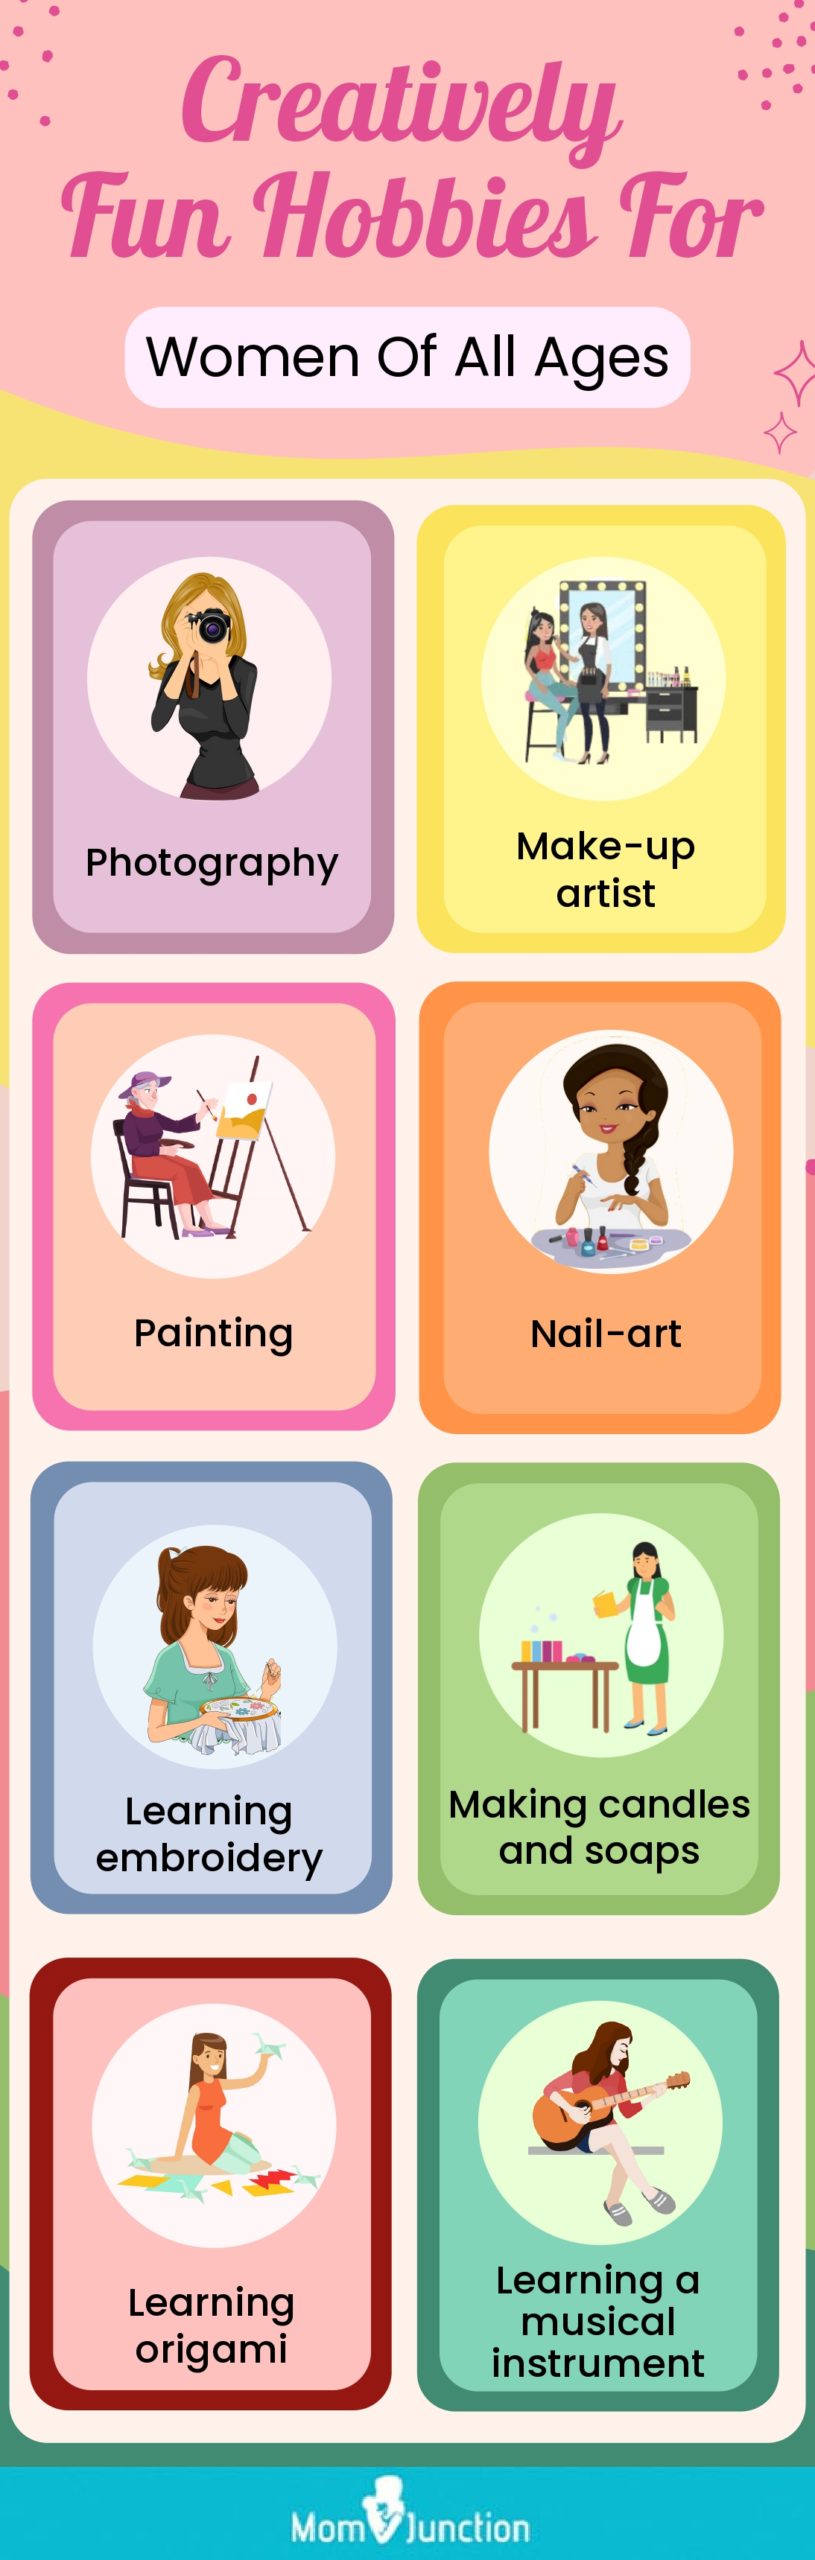 creatively fun hobbies for women of all ages (infographic)